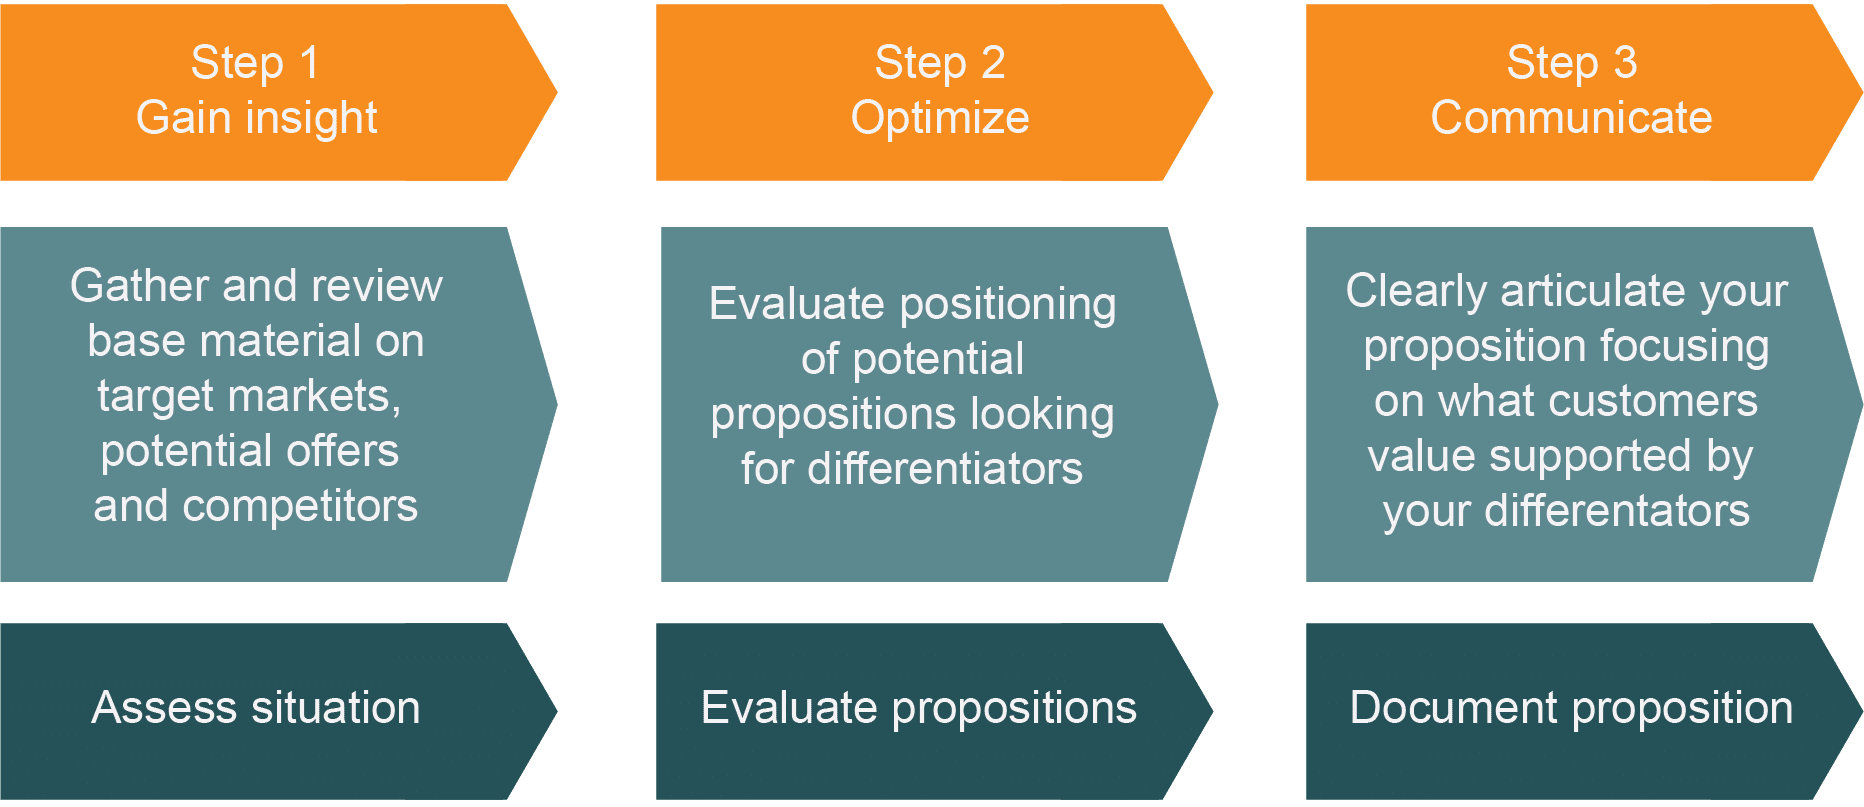 3 steps to creating and using propositions